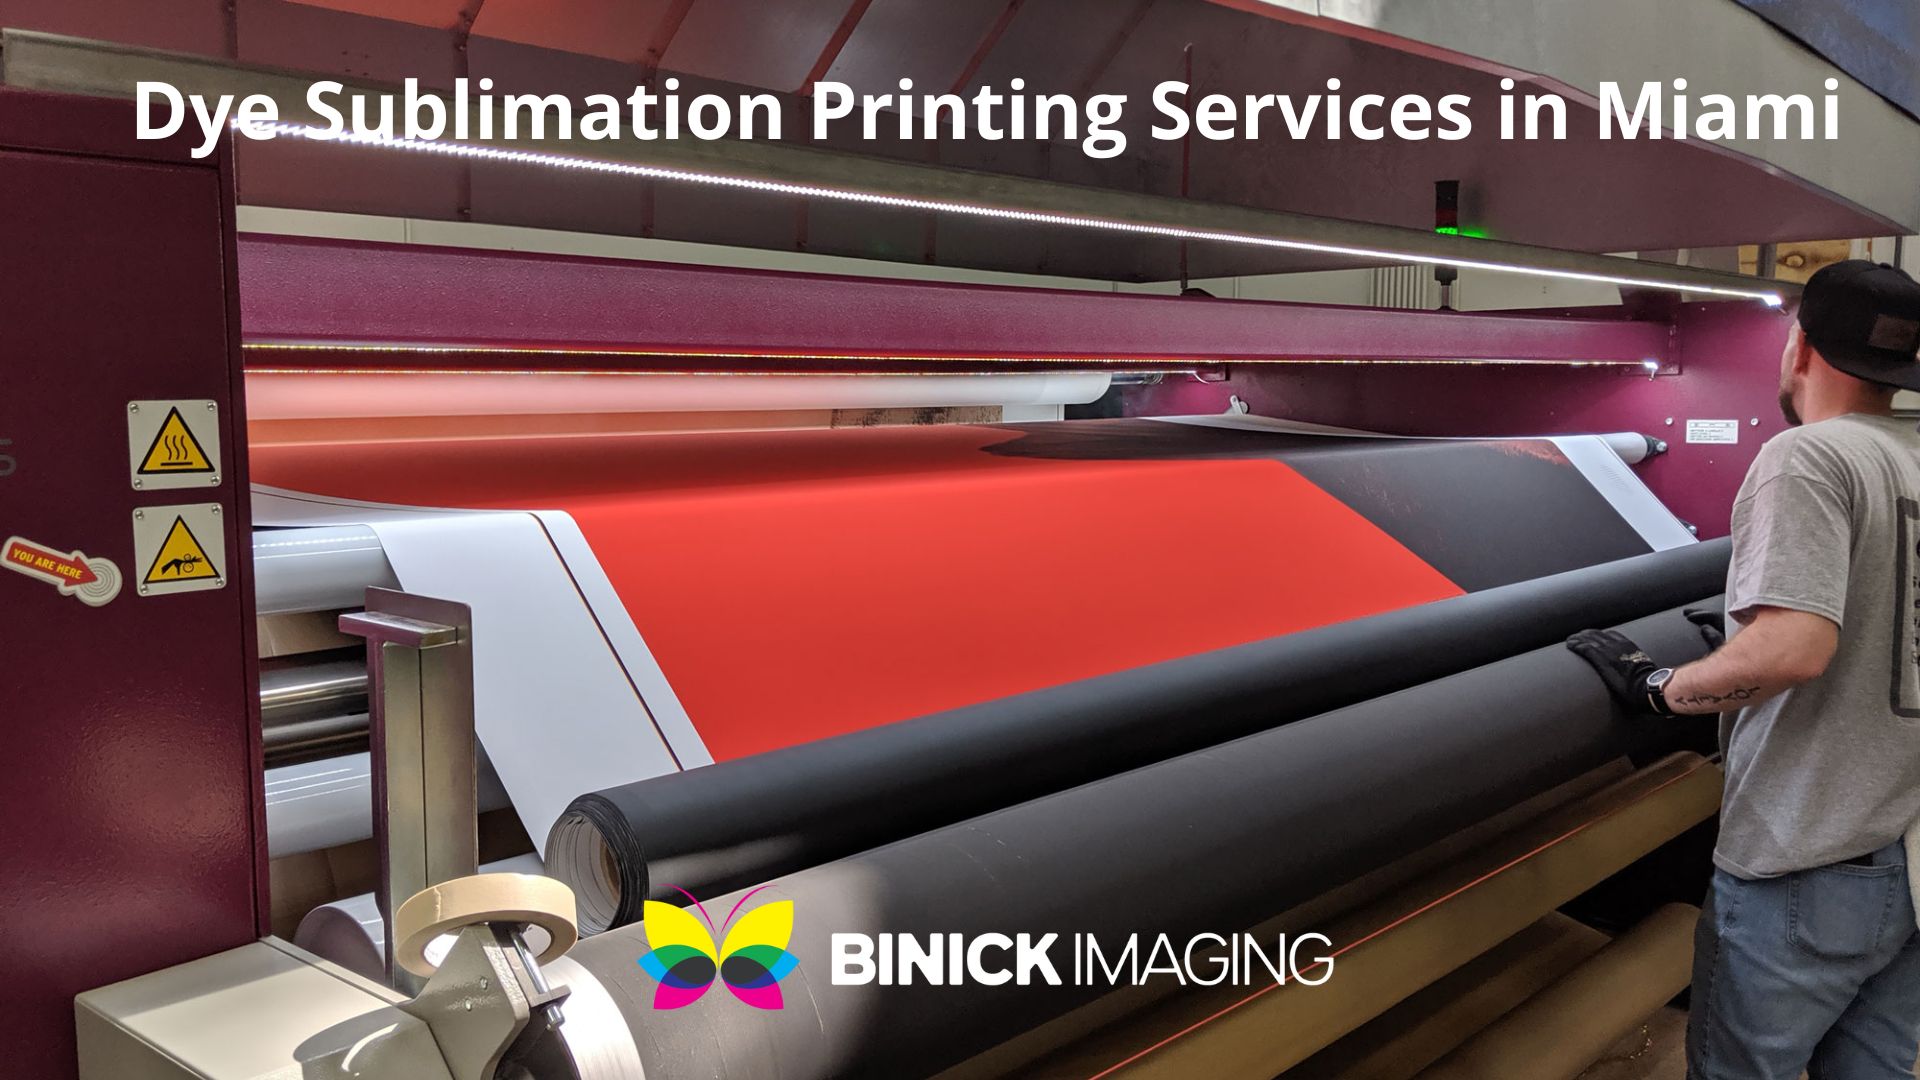 Dye Sublimation Printing Services in Miami.jpg